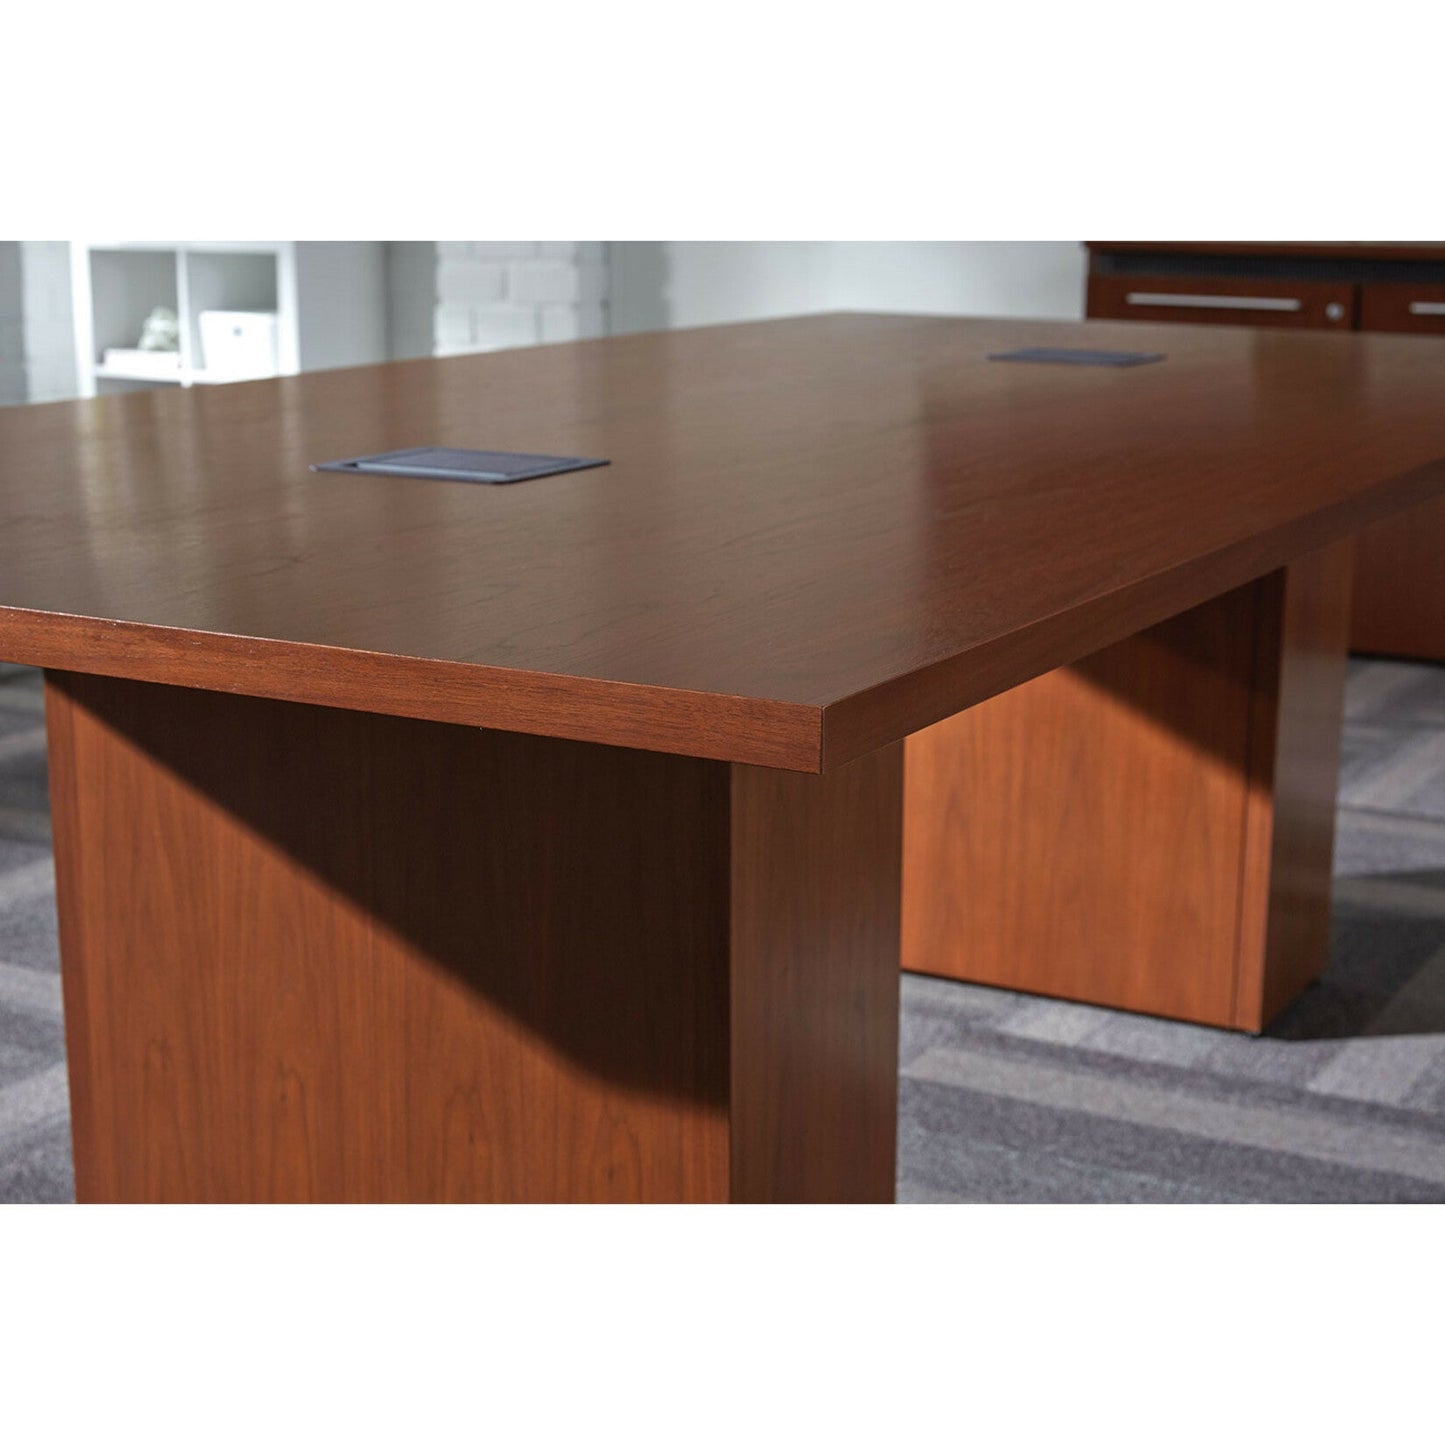 Middle Atlantic Pre-Configured T5 Series 8' Klasik Style Conference Table